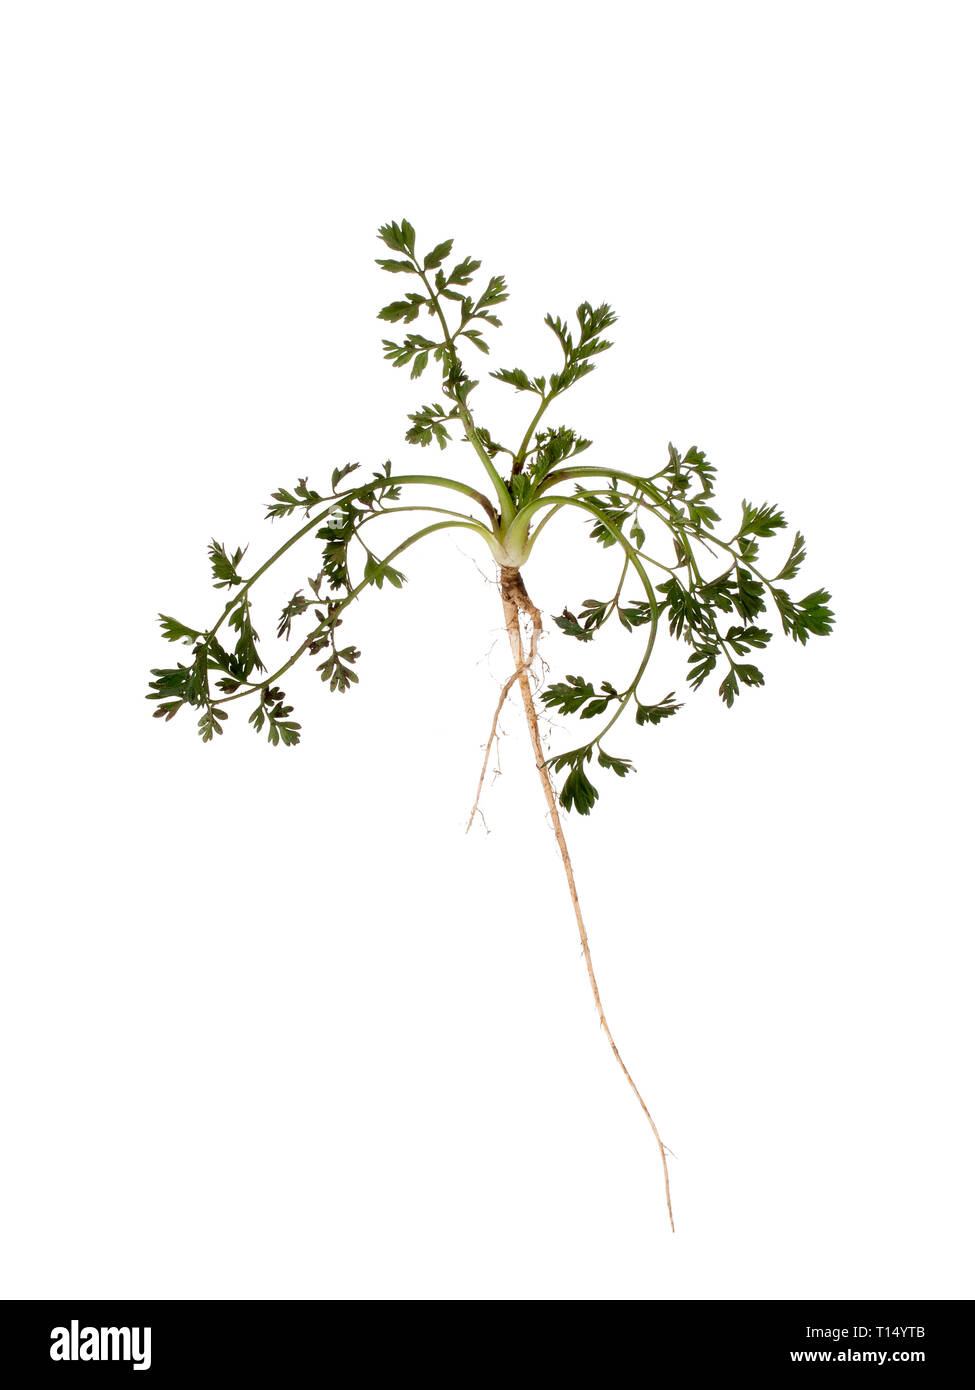 Wild carrot, Daucus carota, garden weed. Whole plant with long root isolated on white. Horticulture problem, though later has beautiful flowers. Stock Photo